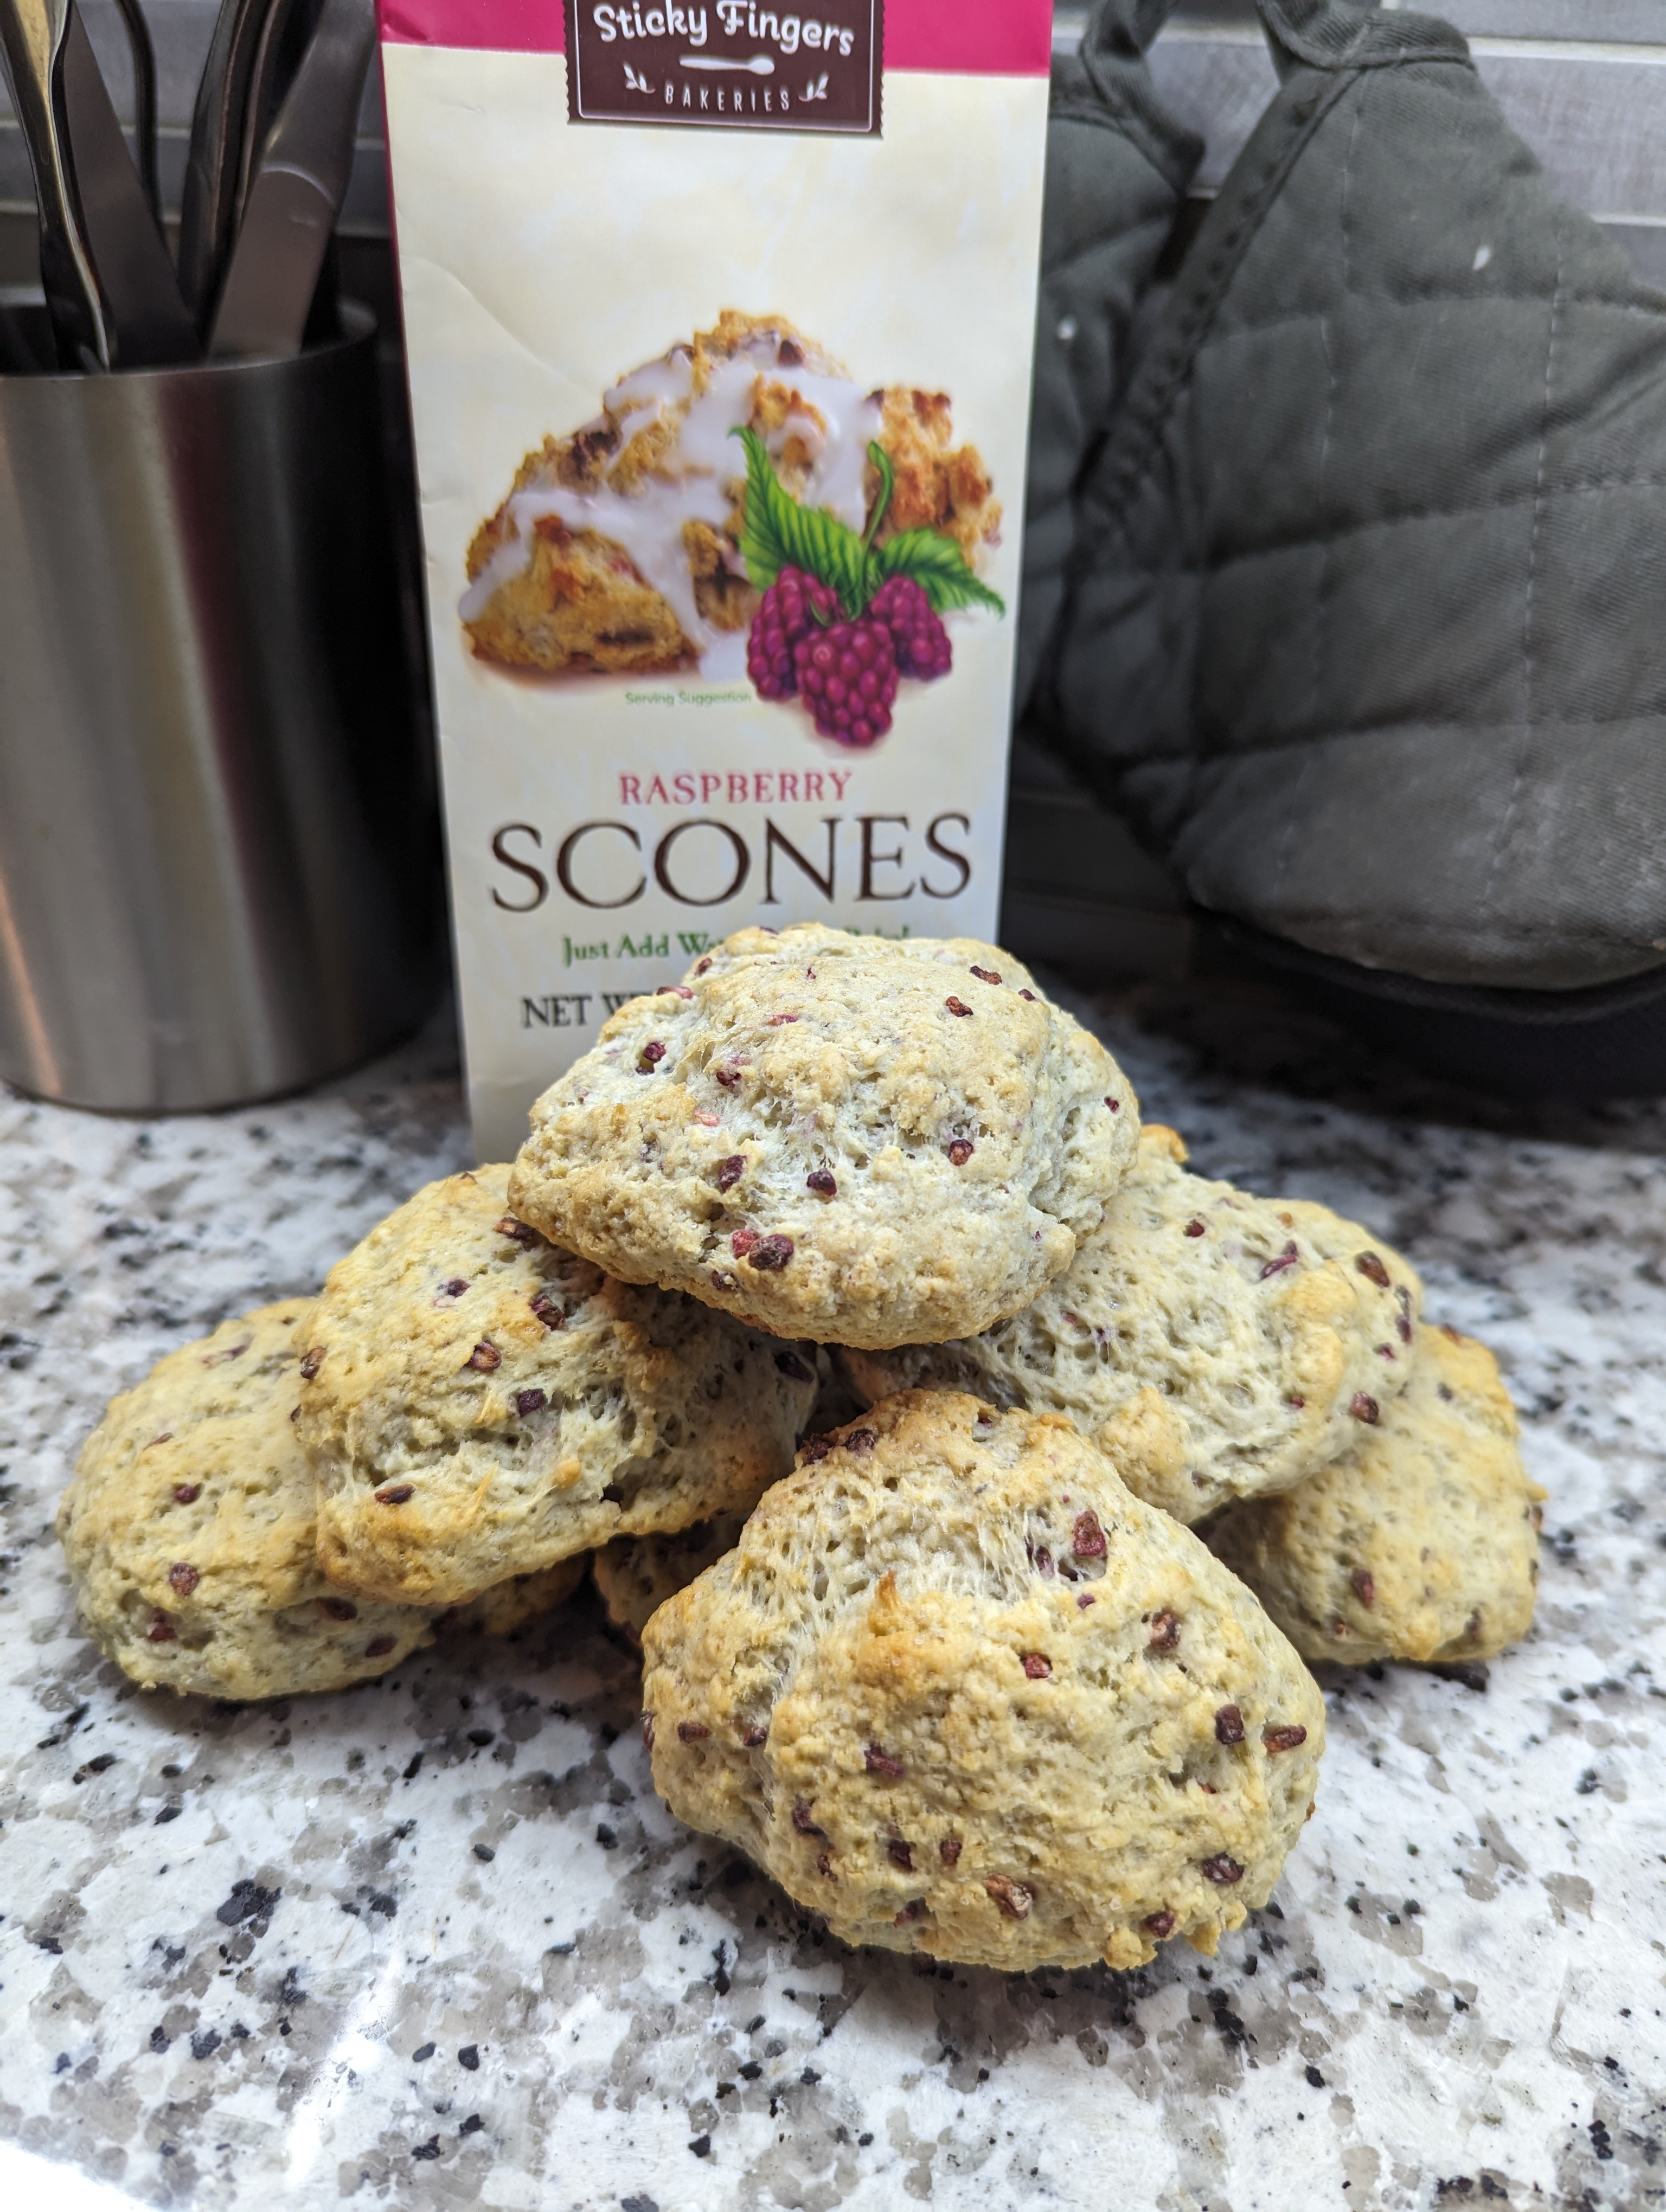 Trying out Sticky Fingers’ Raspberry Scones mix